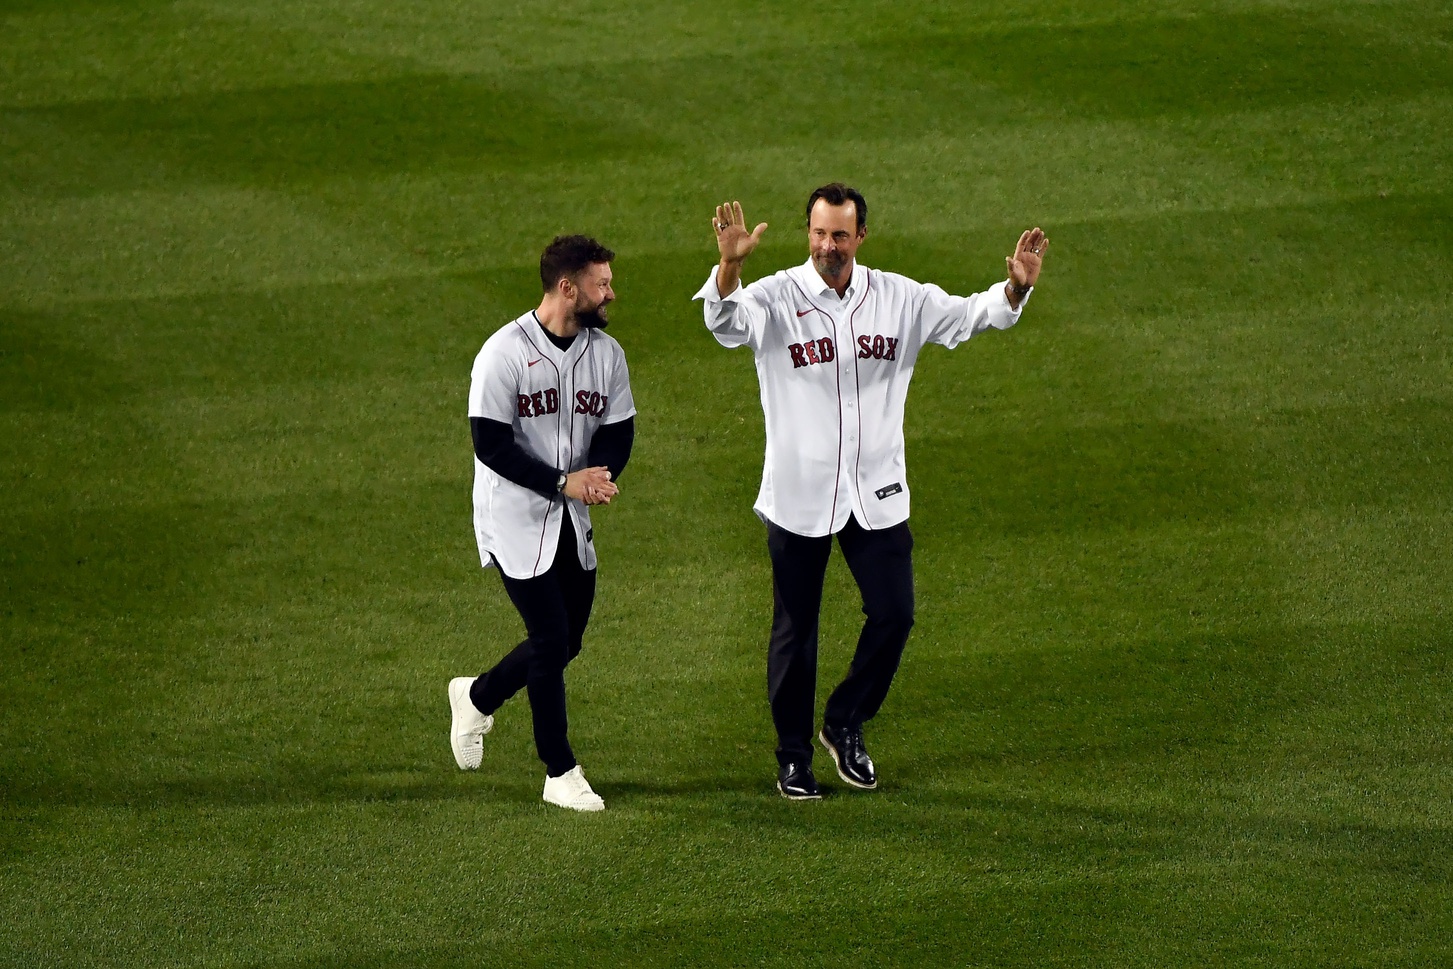 Tim Wakefield, former Pirate, has died at 57